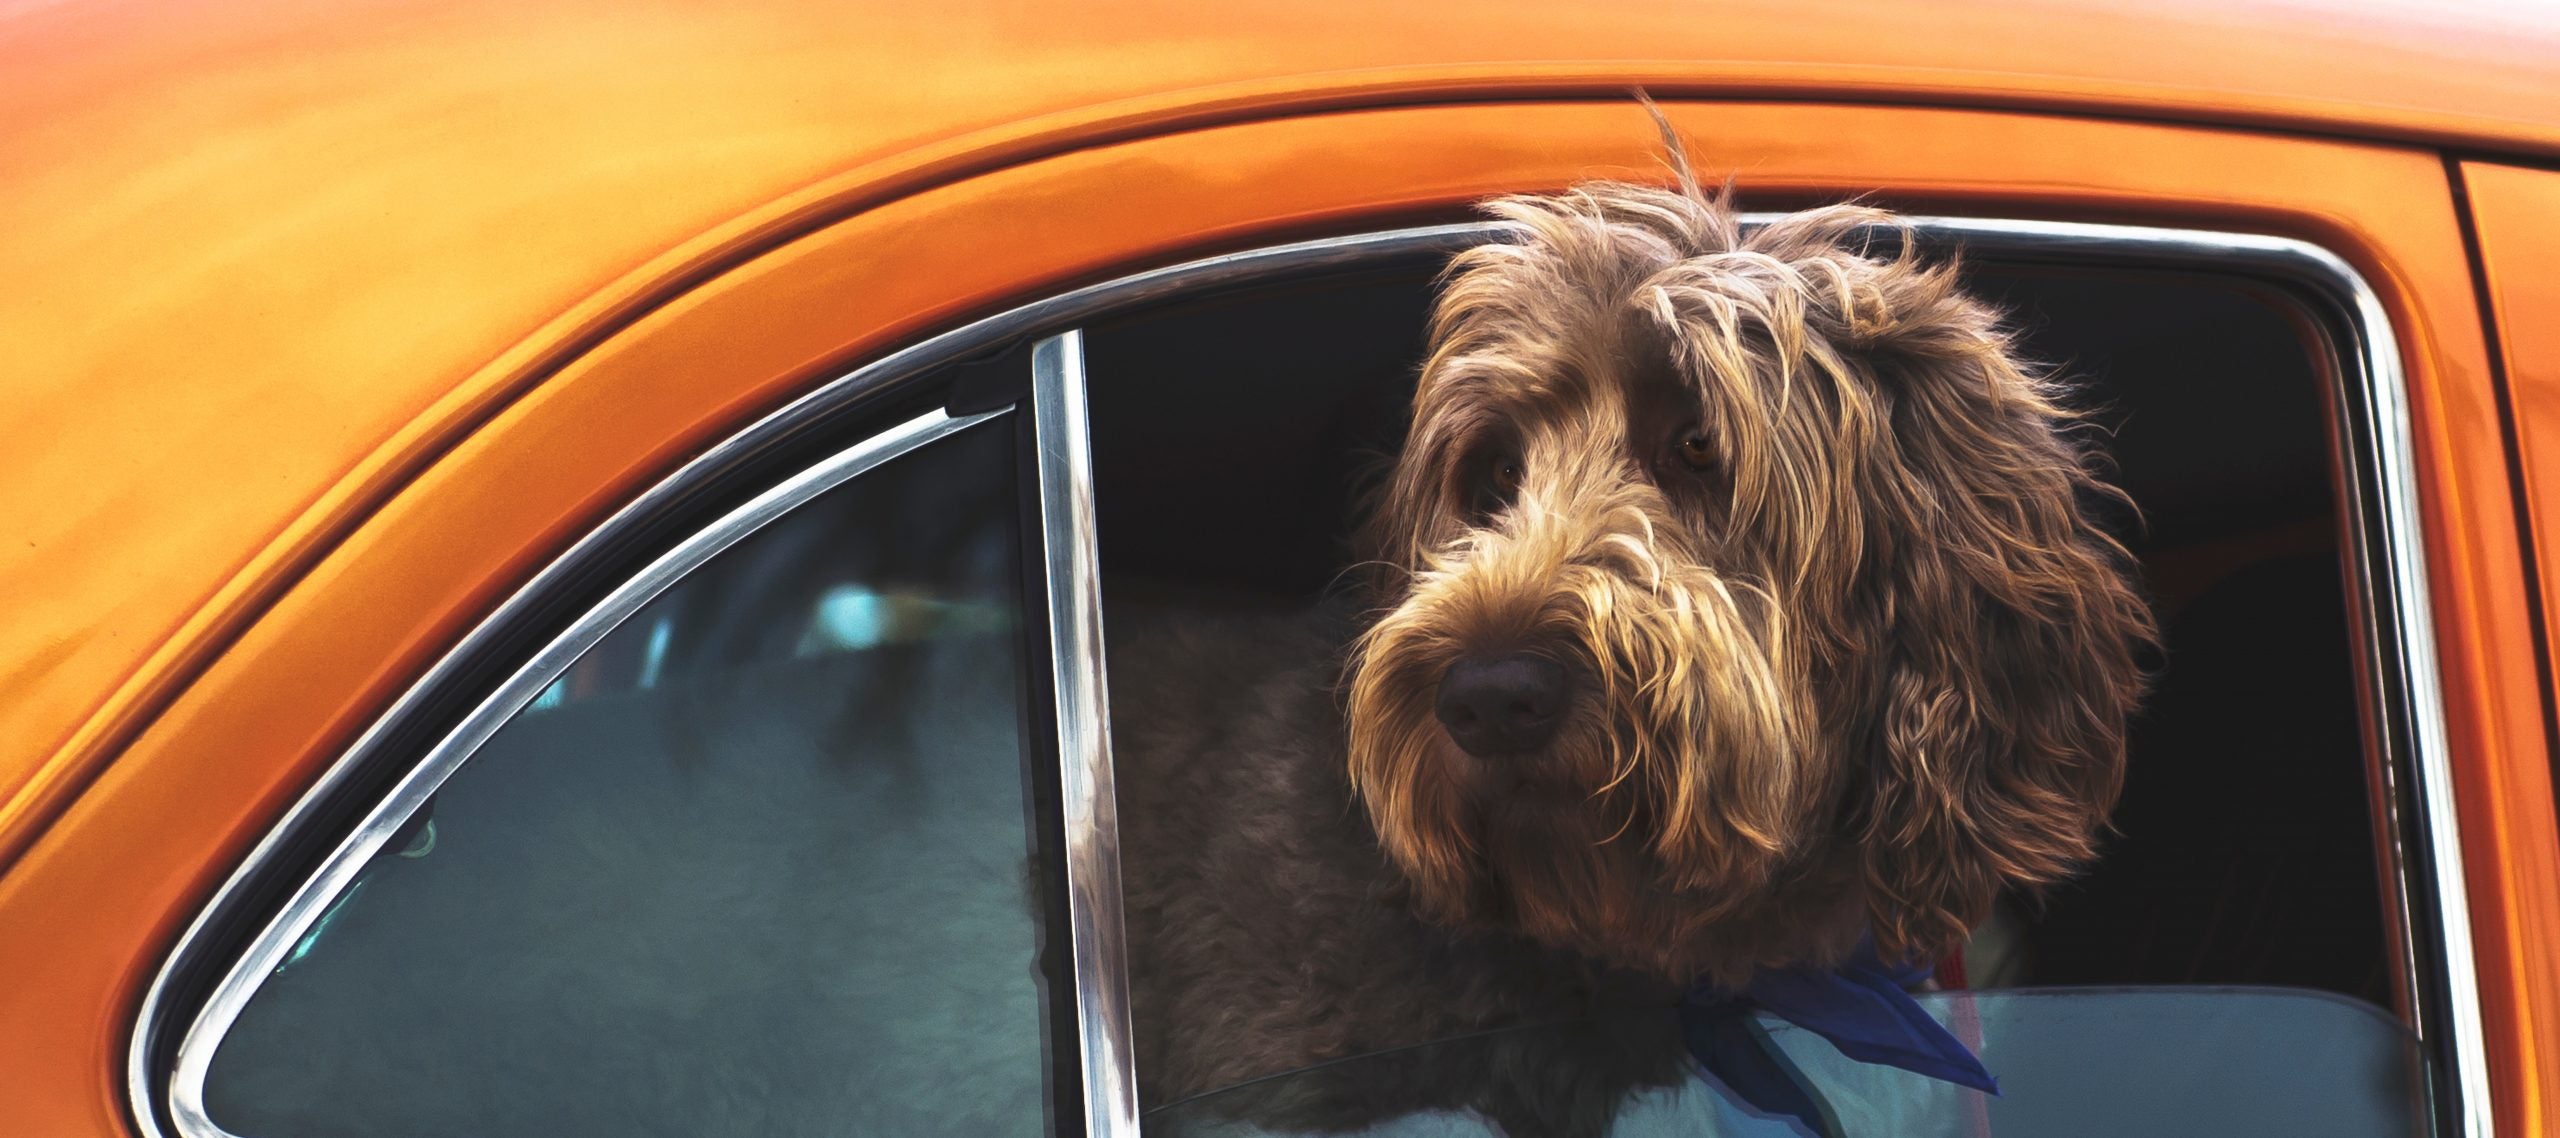 Curly dog traveling in an orange car